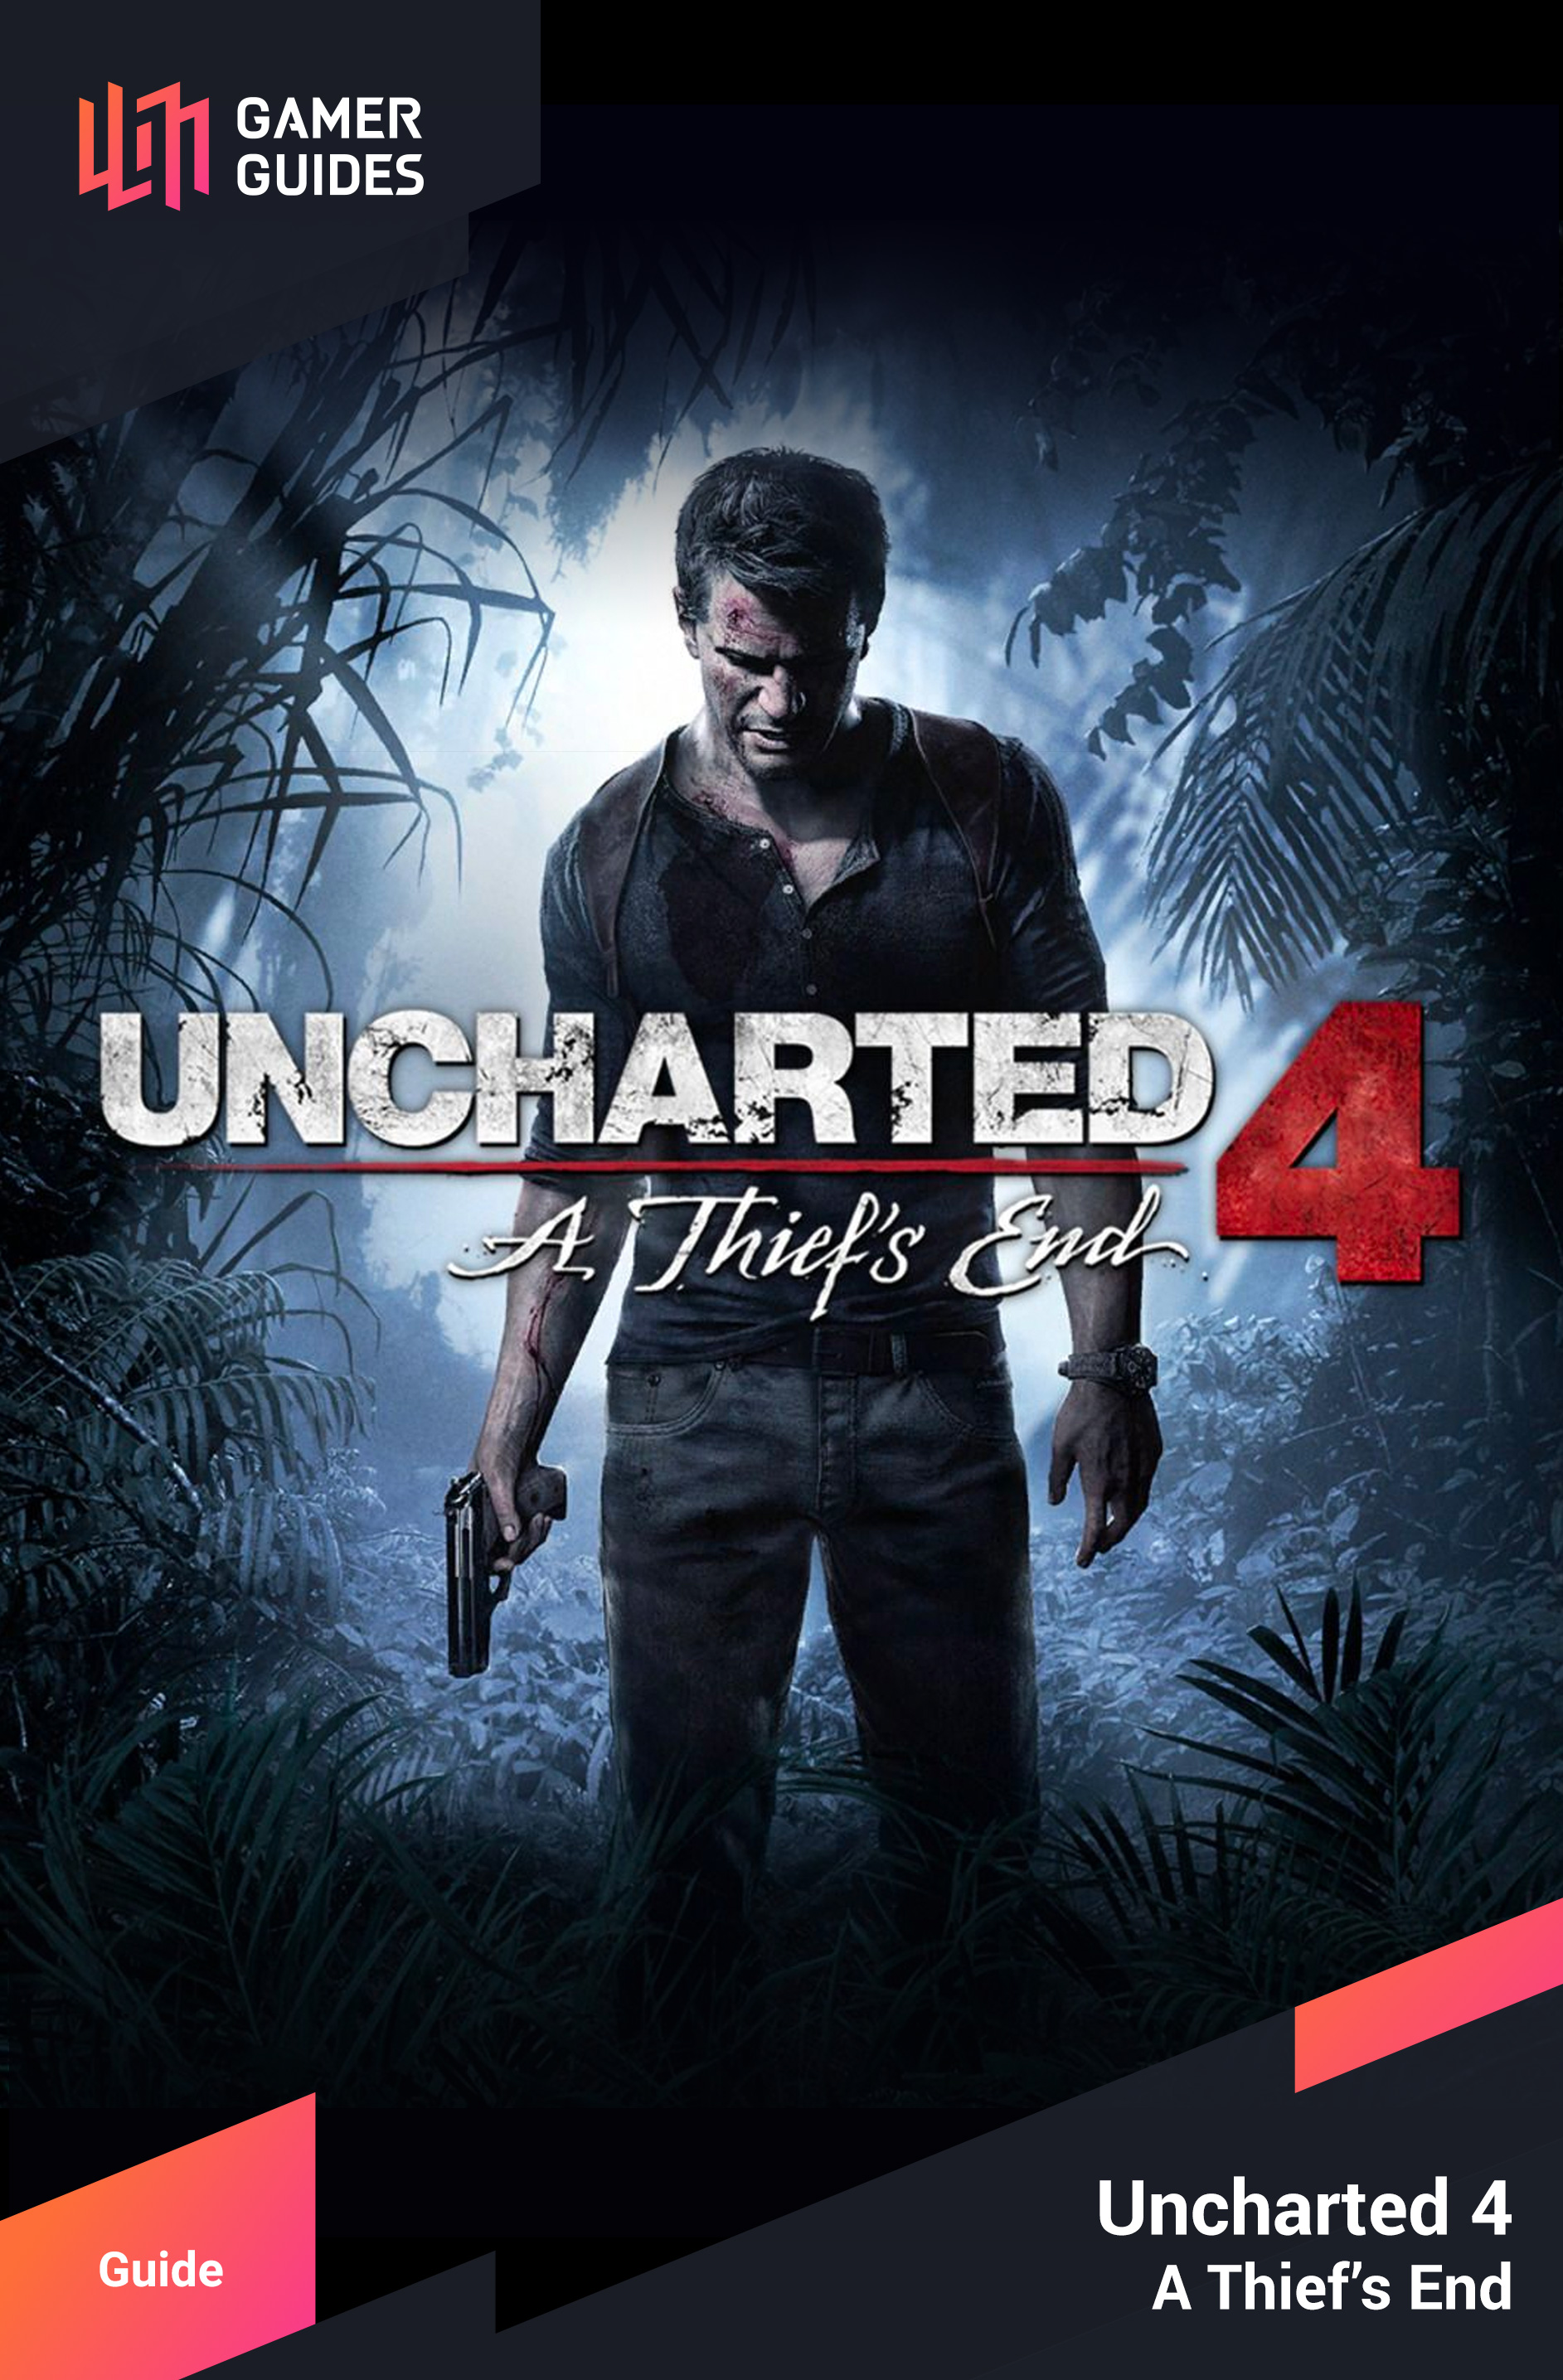 lights-out-uncharted-4-a-thief-s-end-gamer-guides